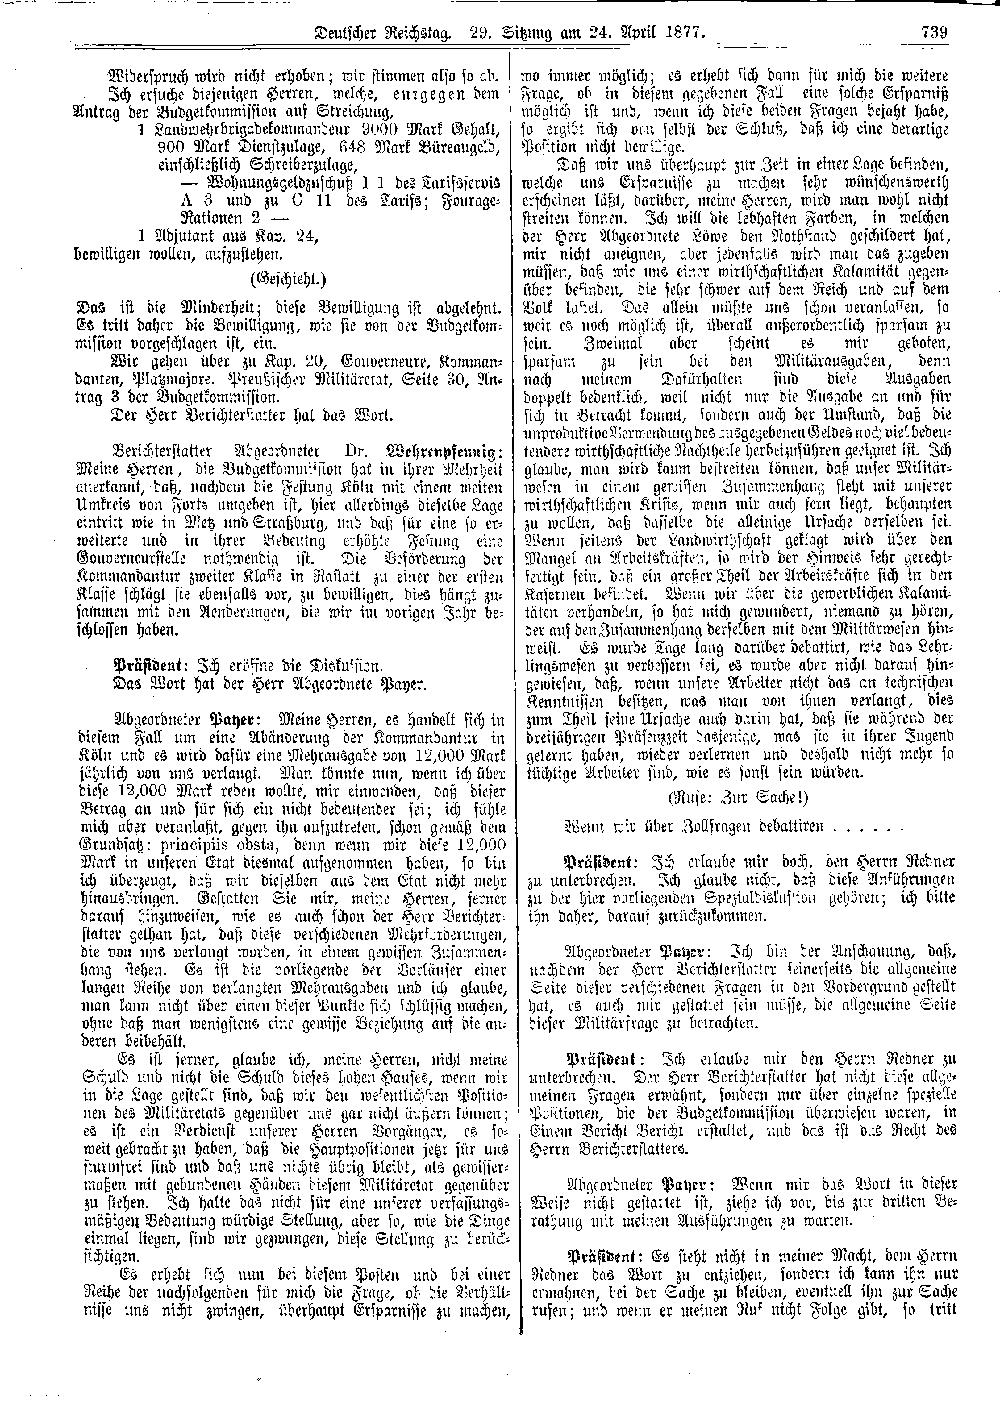 Scan of page 739